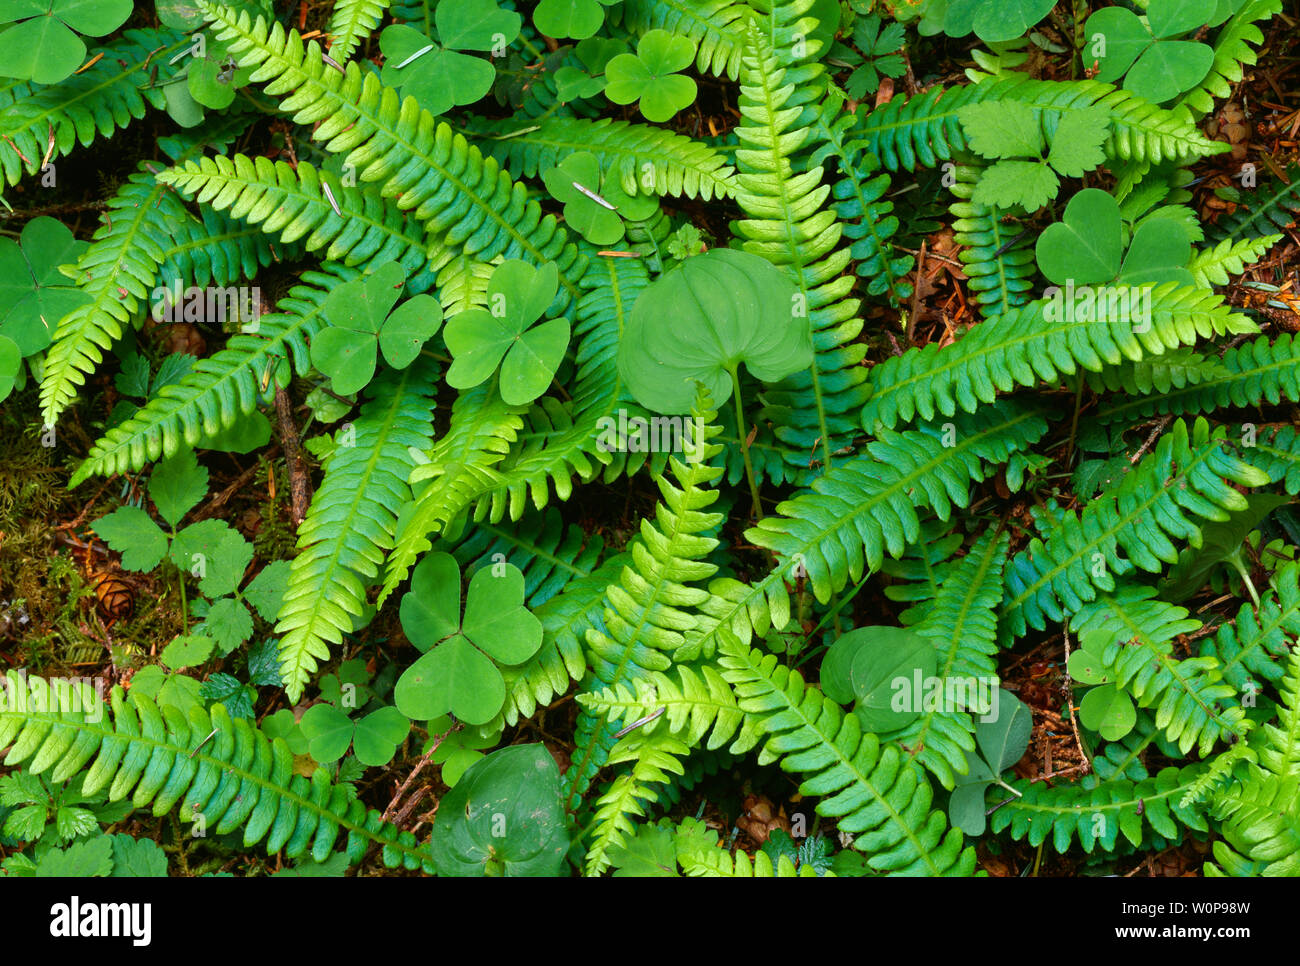 USA, Washington, Olympic National Park, Deer fern, wood sorrel and wild ginger crowd the forest floor; Hoh Rain Forest. Stock Photo